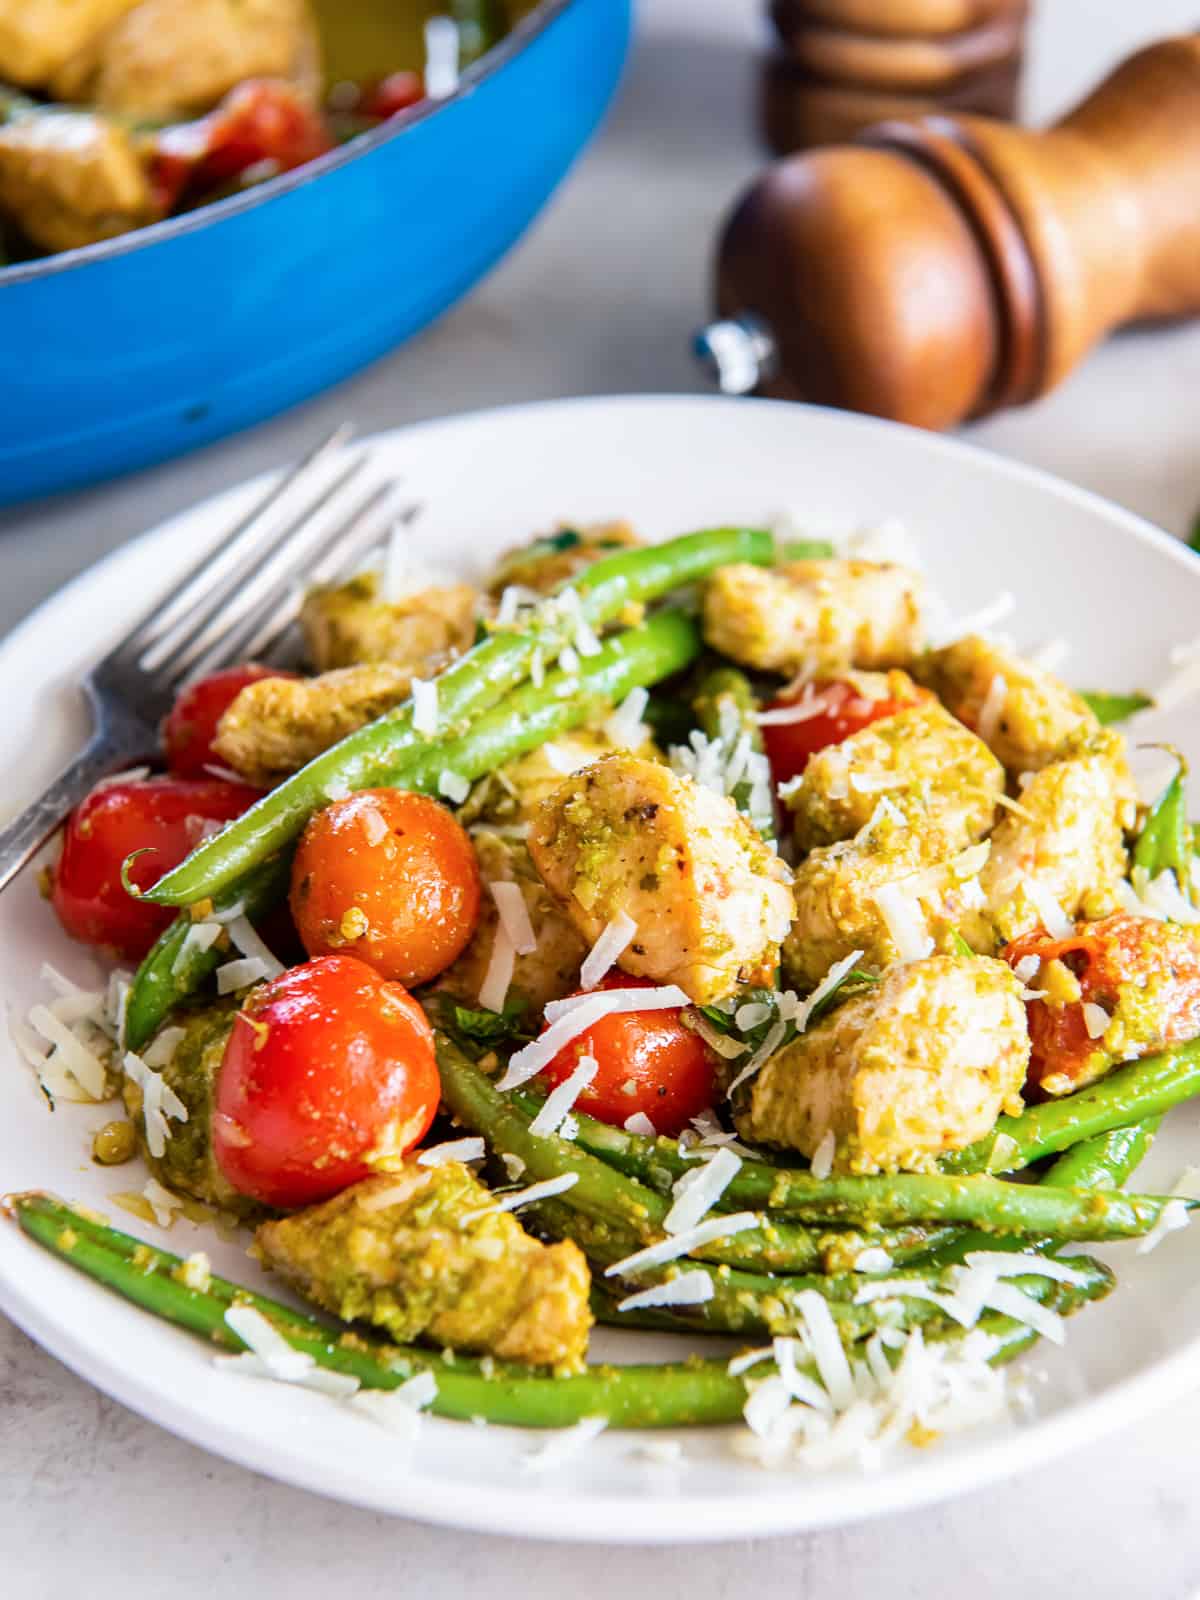 A serving of pesto chicken with green beans and tomatoes topped with Parmesan on a white plate in front of a skillet.